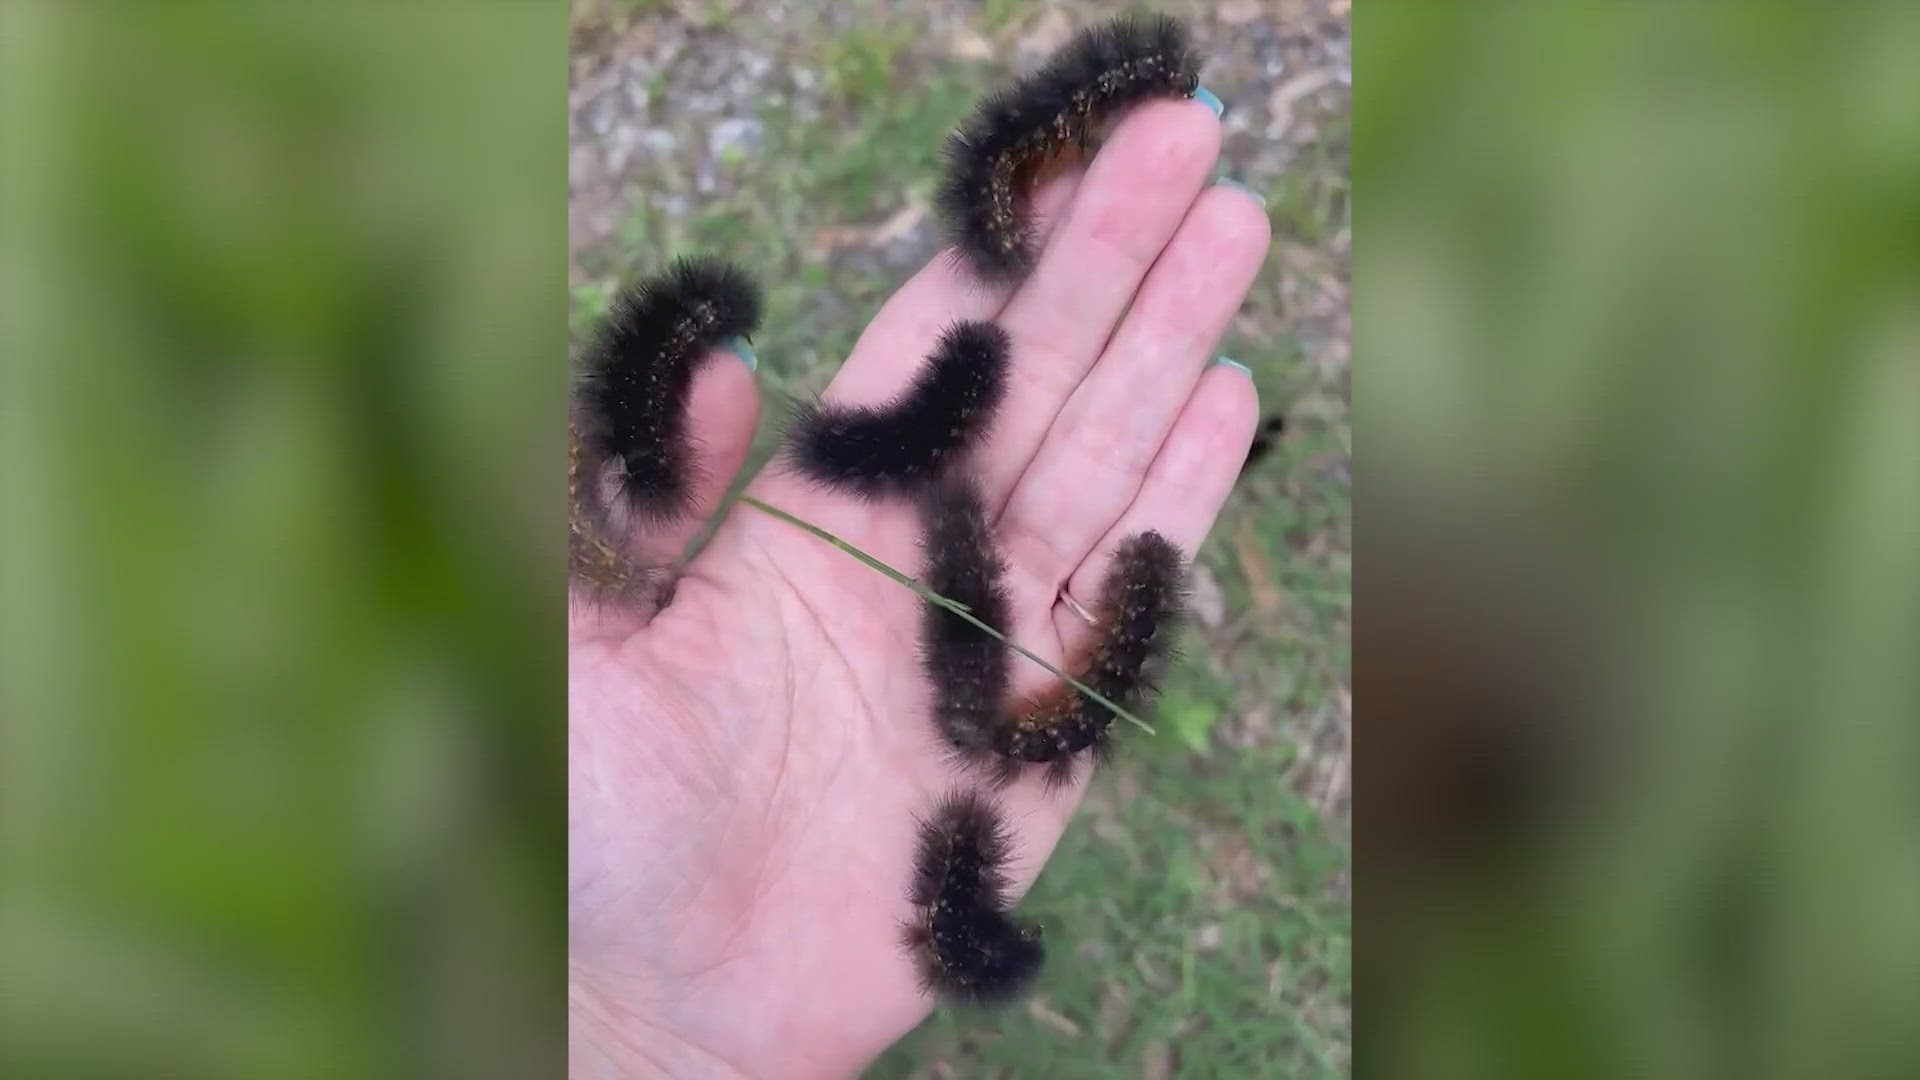 The saltmarsh caterpillars are one of eight types of woollybear caterpillars named for the fur or fuzz that covers their little bodies.